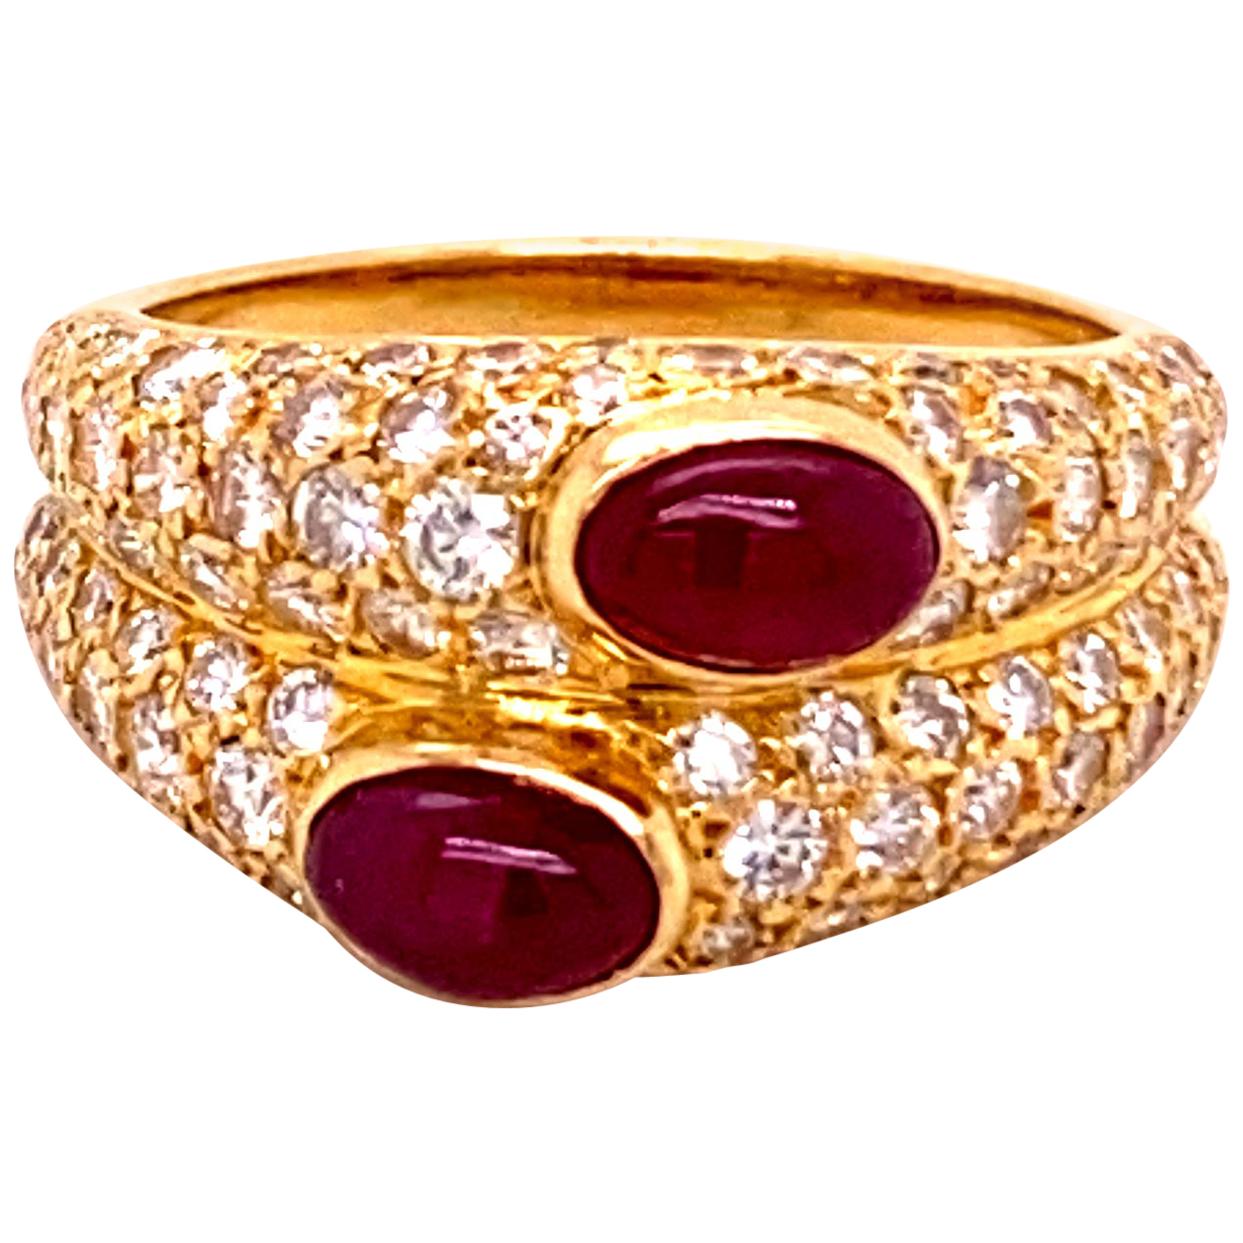 Cartier Ruby and Diamond Ring in 18 Karat Yellow Gold